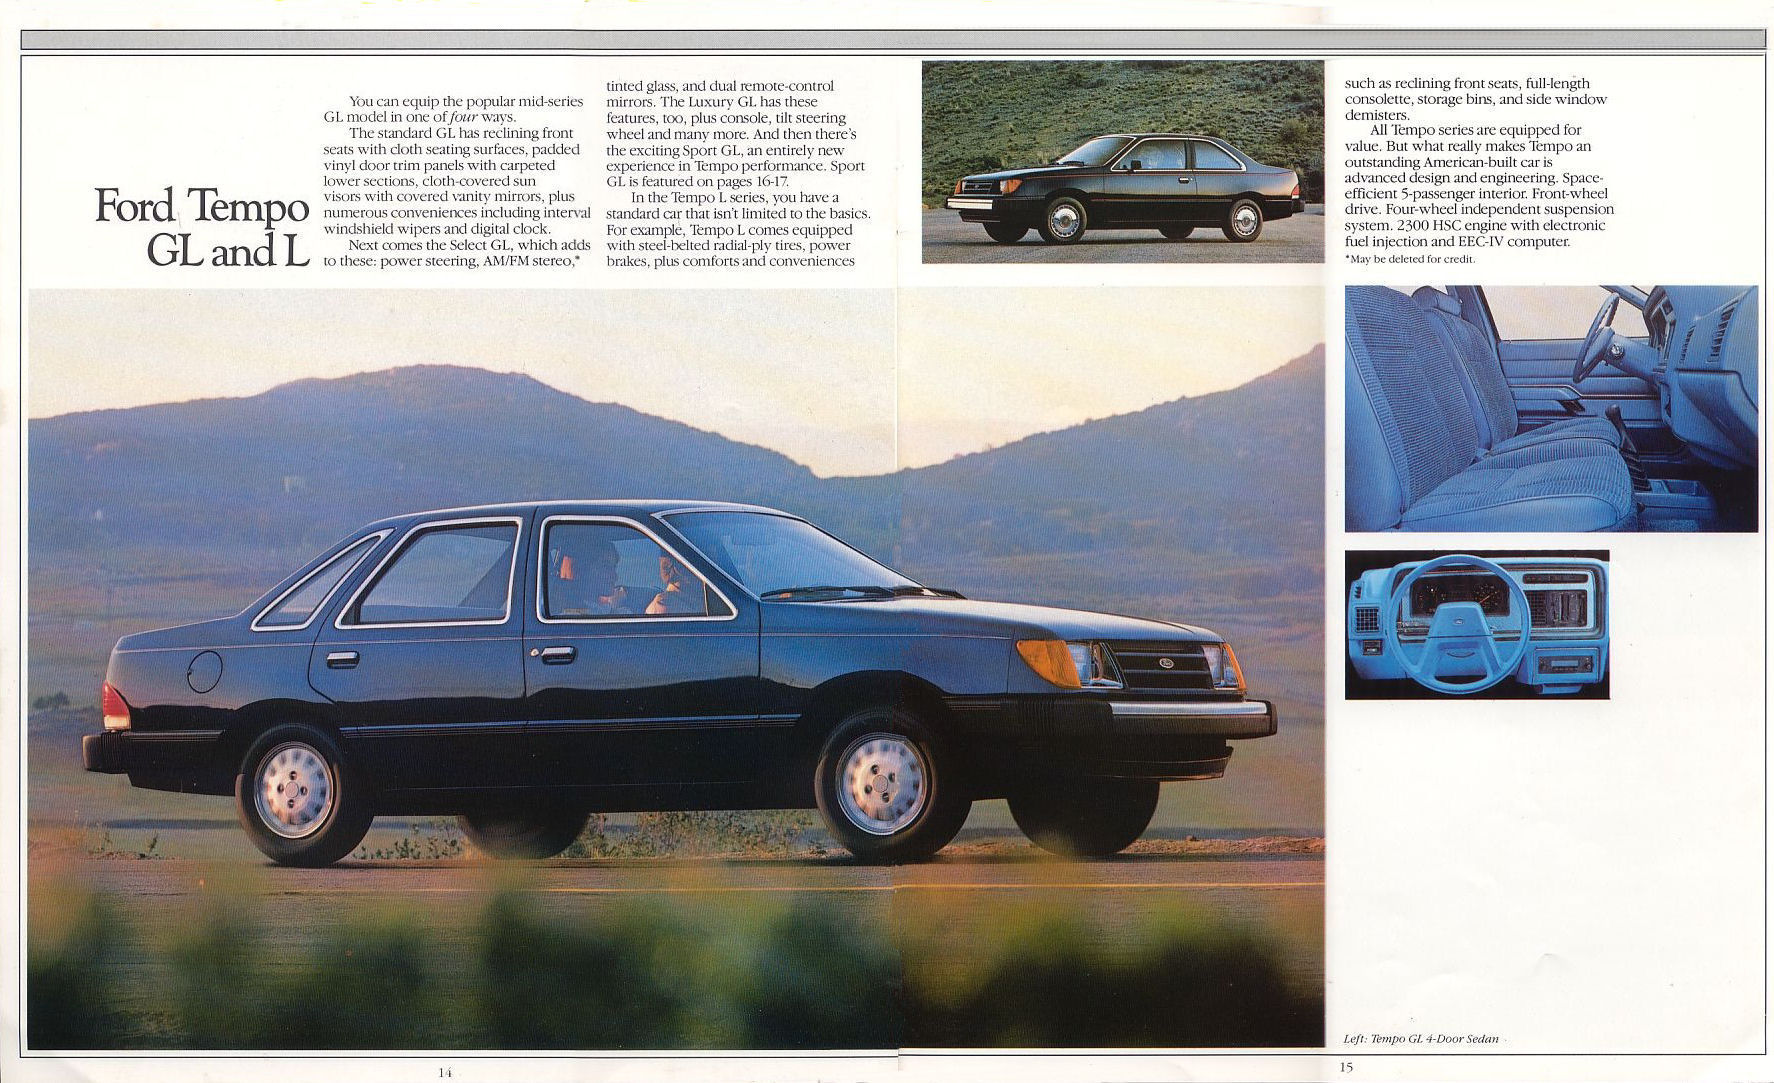 1985 Ford Tempo-14 amp 15